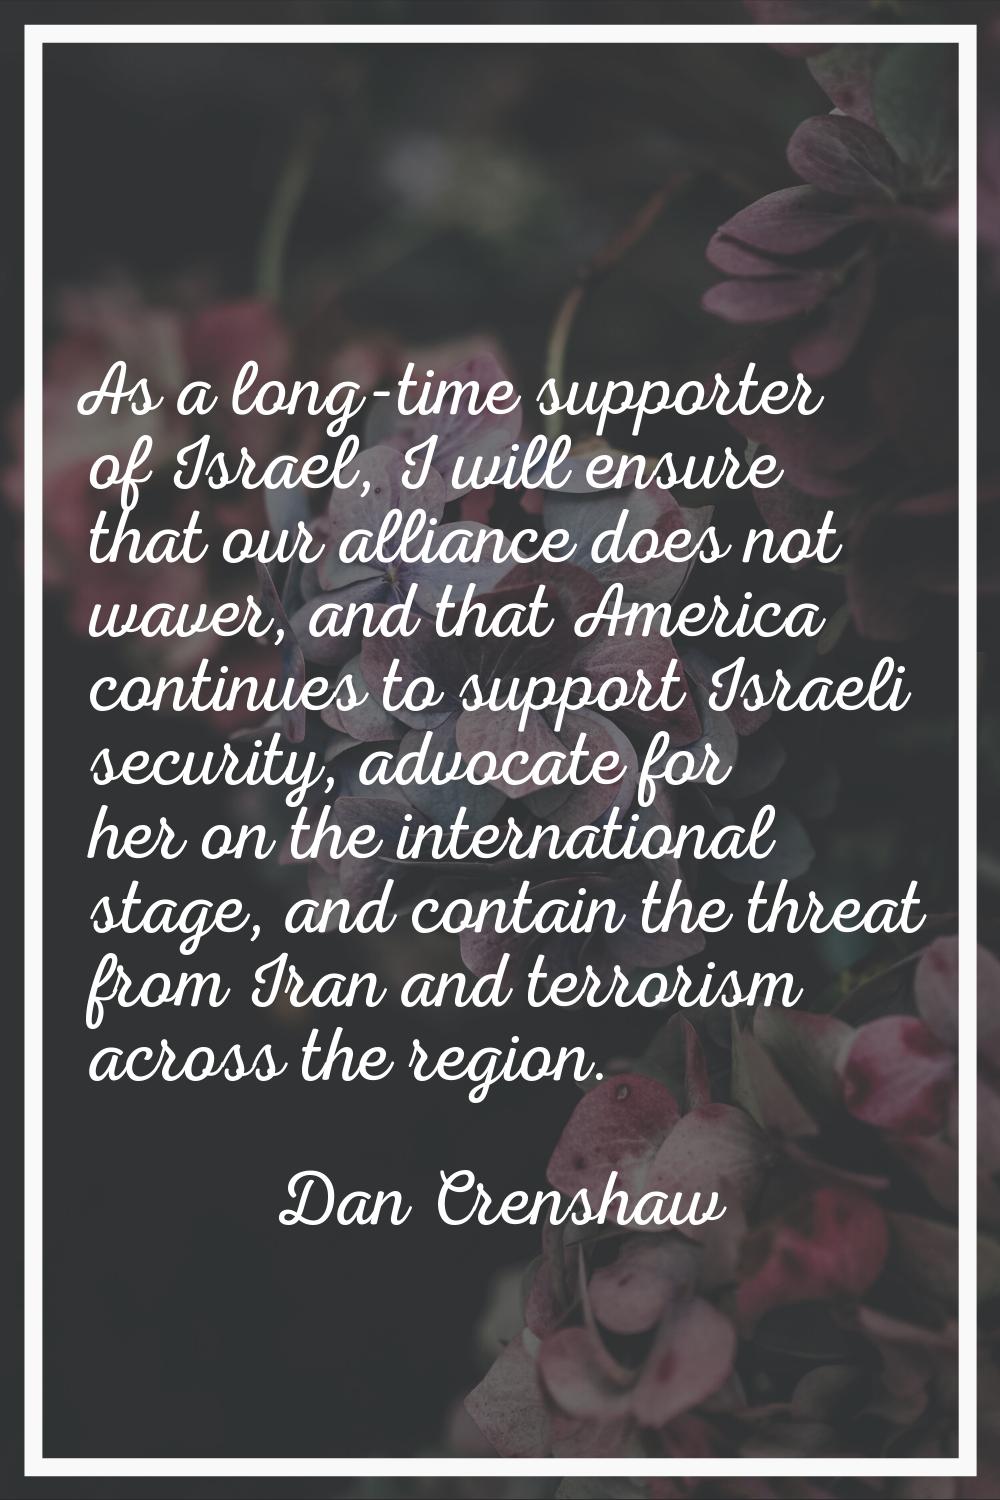 As a long-time supporter of Israel, I will ensure that our alliance does not waver, and that Americ